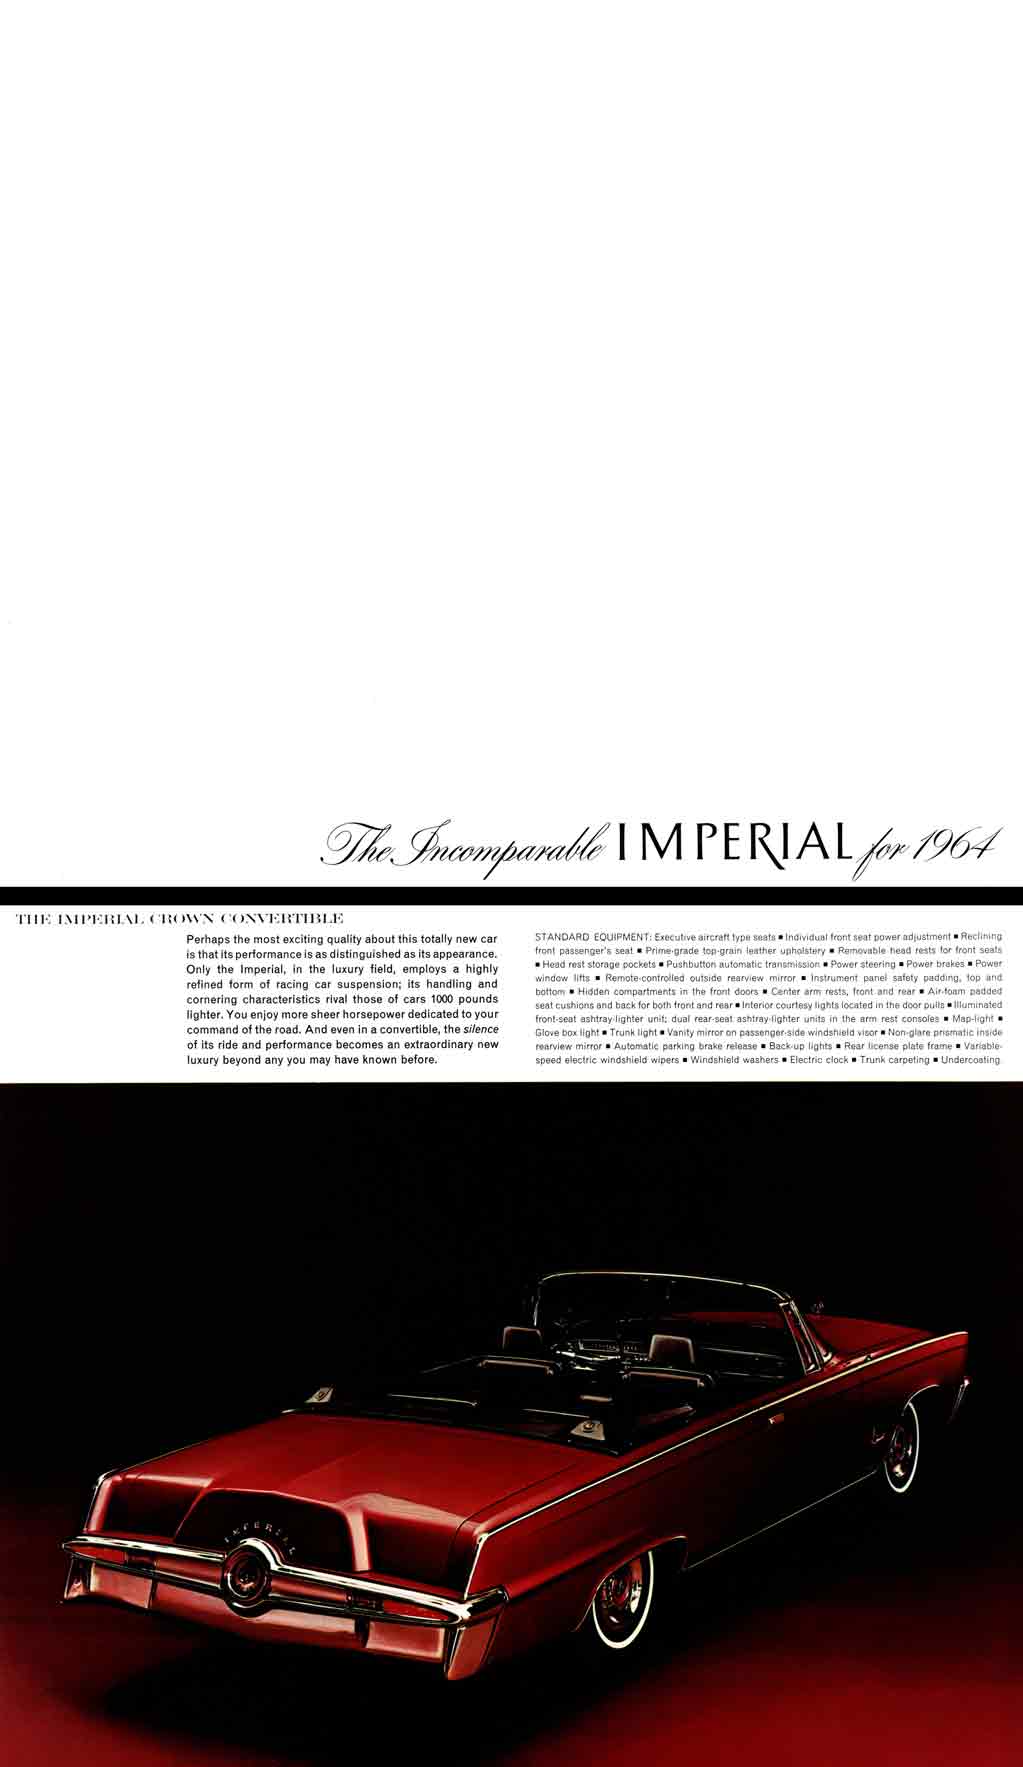 Imperial 1964 Chrysler - The Incomparable Imperial for 1964